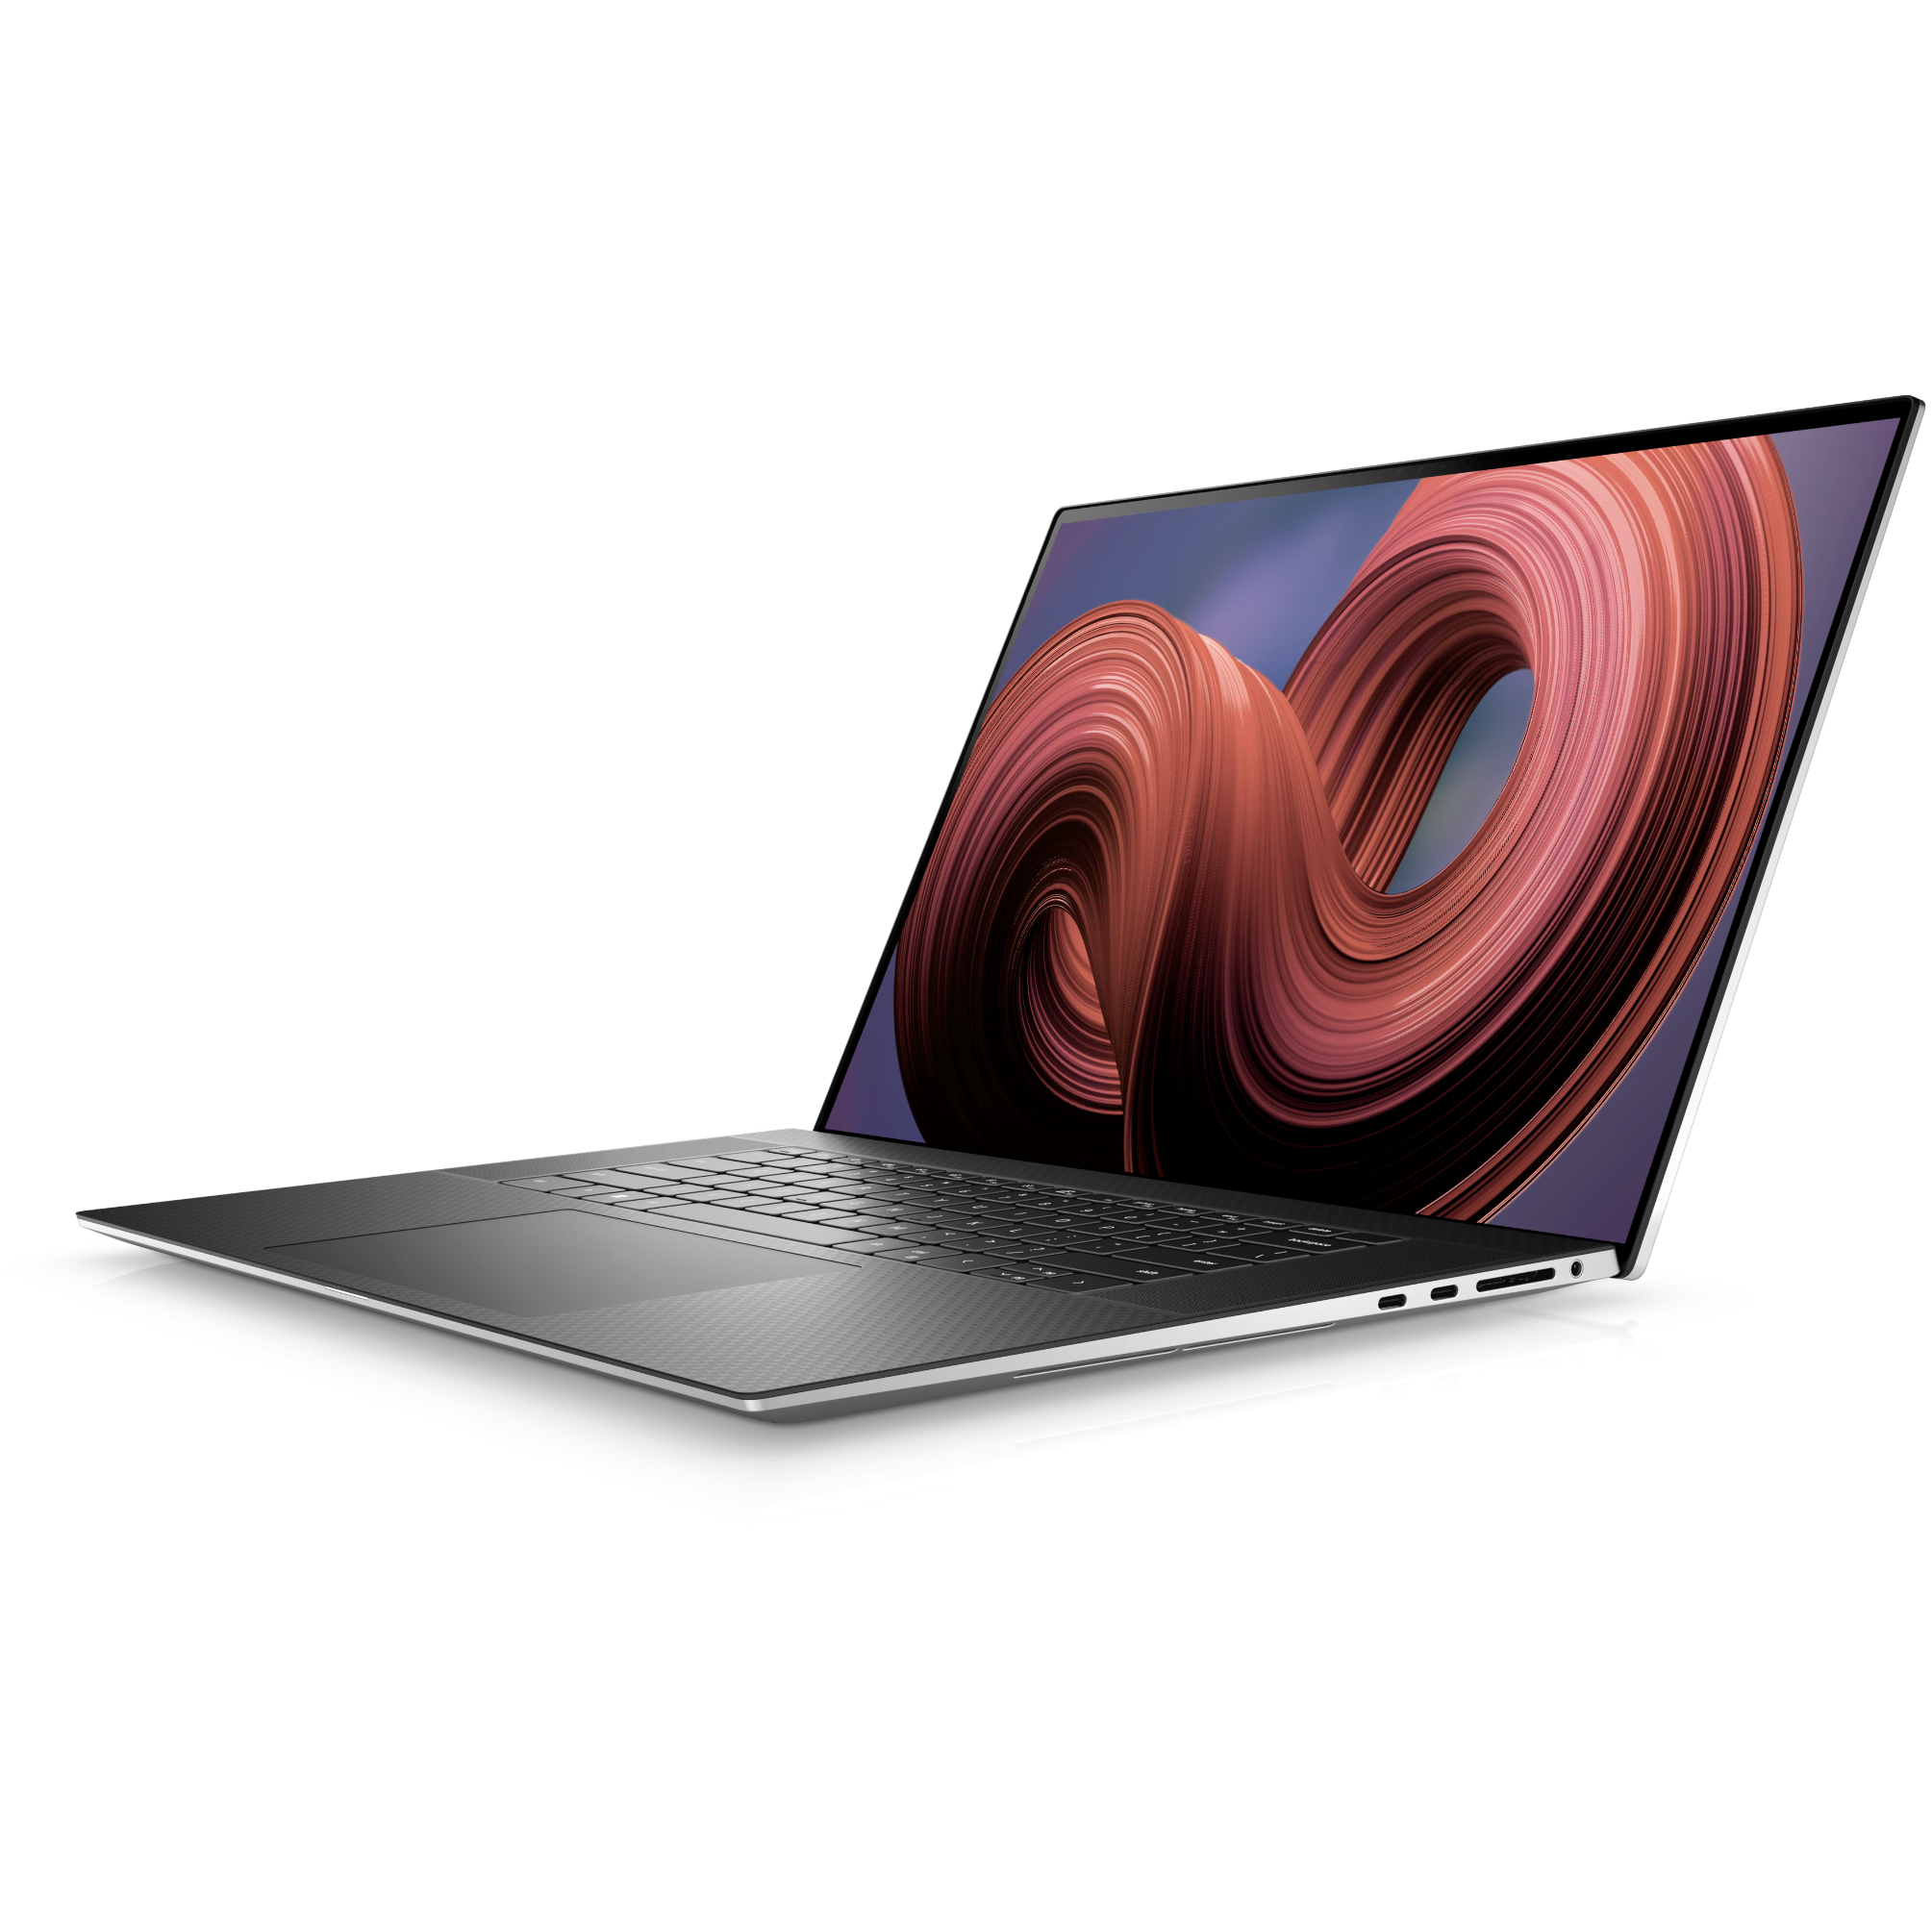 Dell XPS 17 9730 with screen open and desktop background showing